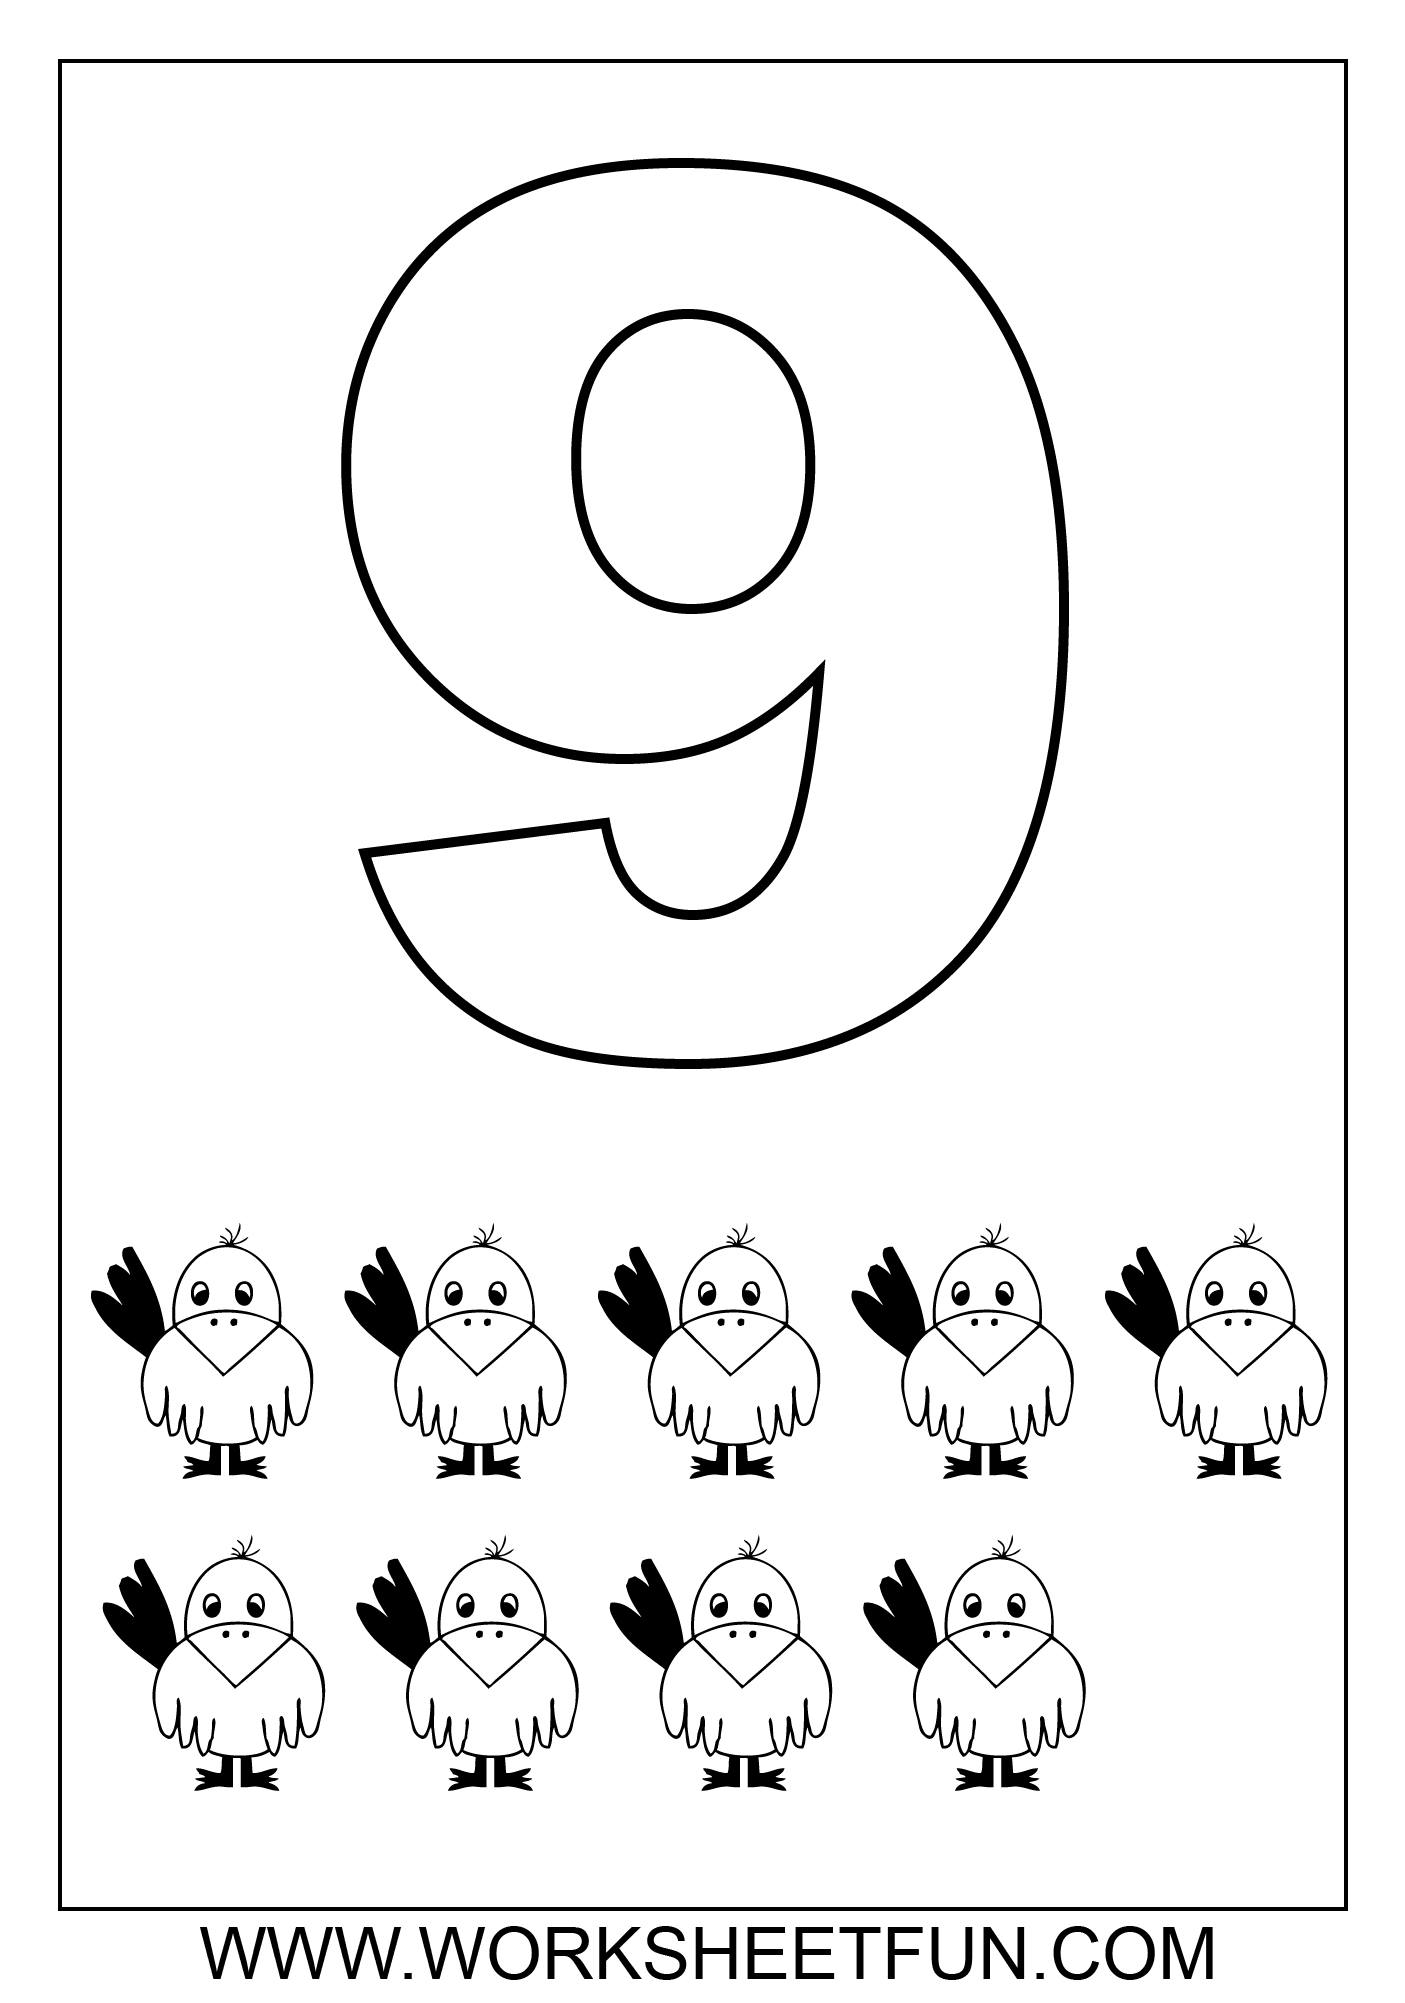 Worksheets Number 9 Coloring Page Image